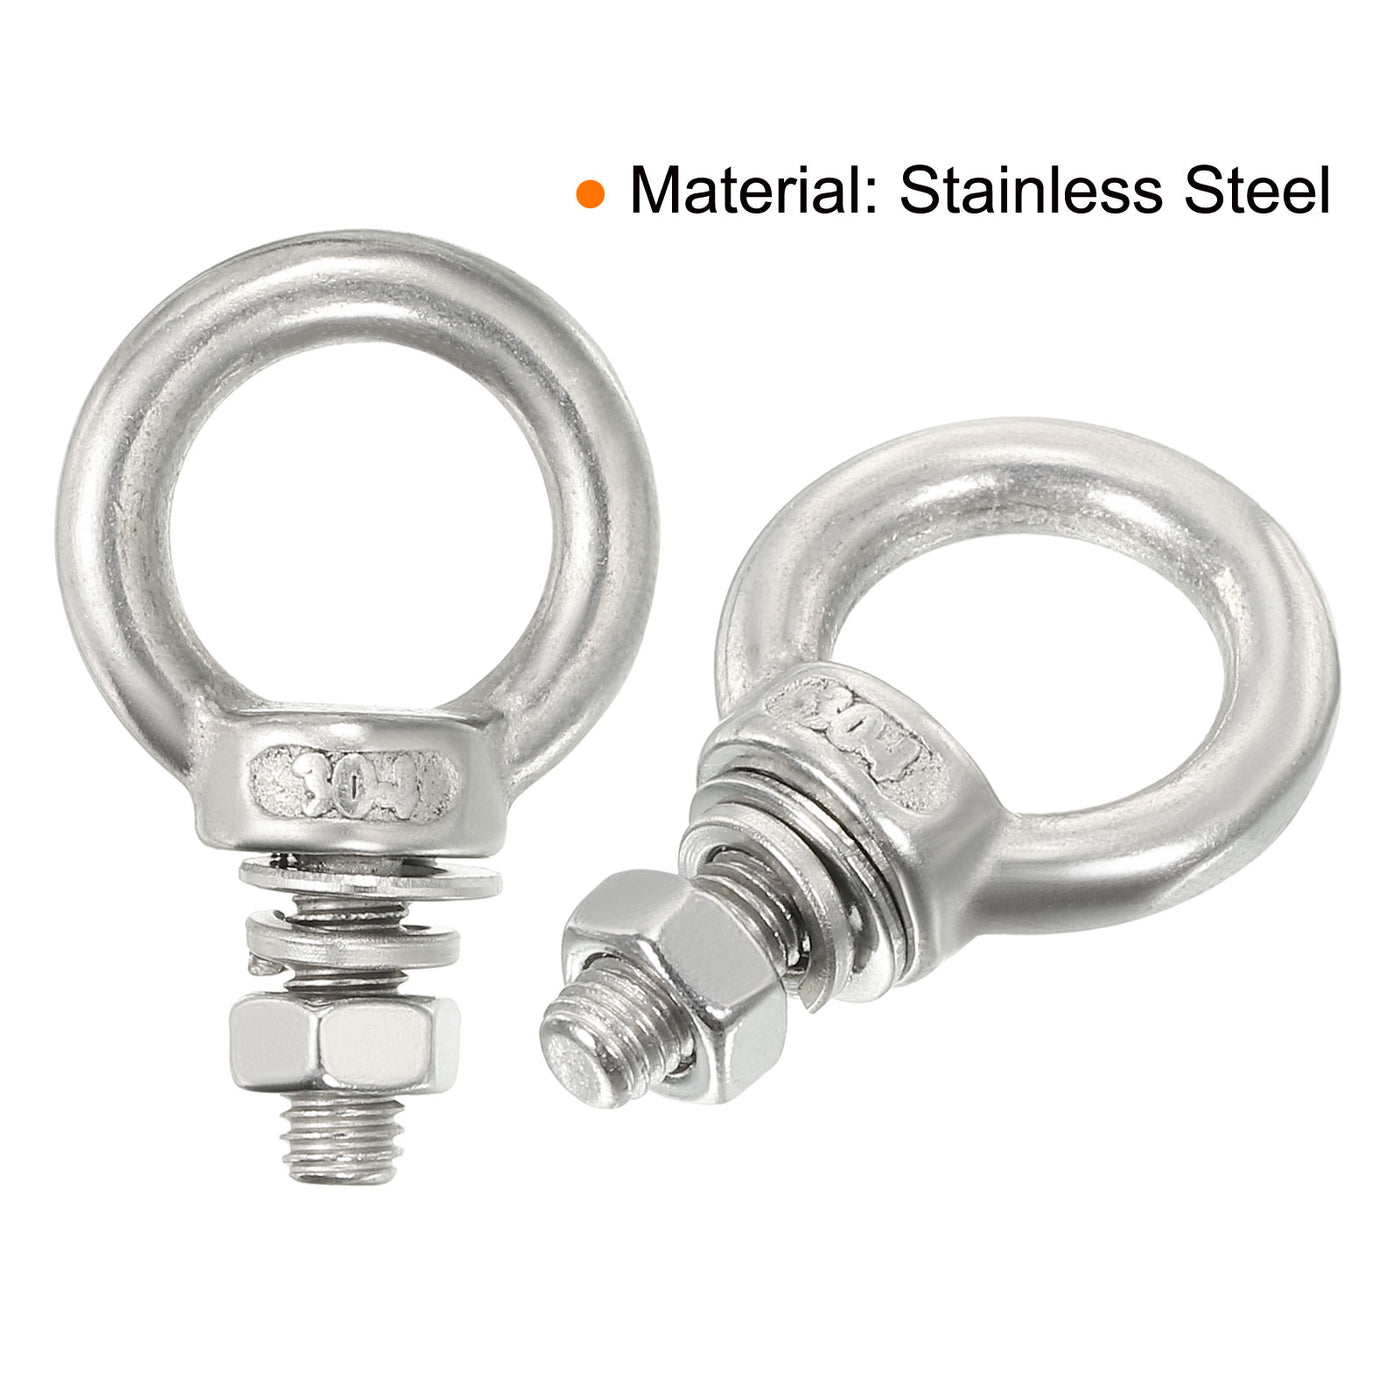 uxcell Uxcell M5x11 3/16"x7/16" Stainless Steel Eye Bolts Threaded Screw Eyebolt Shoulder Ring with Nuts Washers for Lifting Hanging, 10 Set